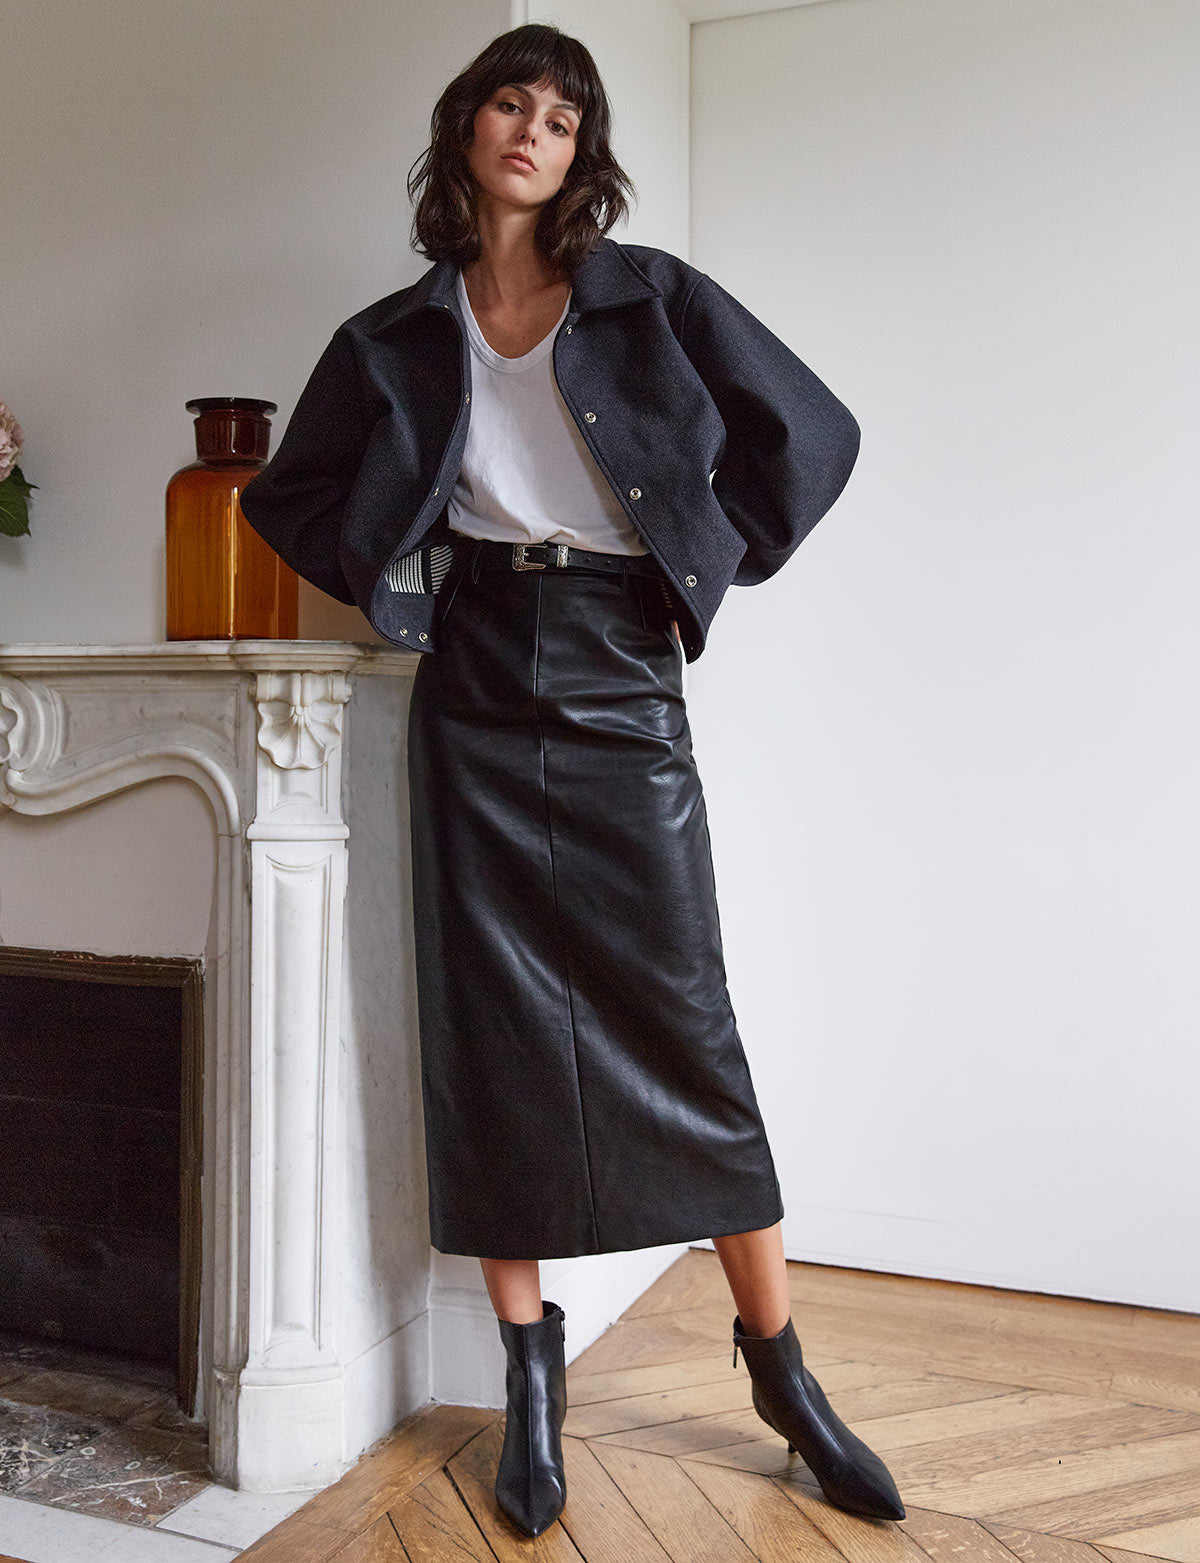 Fashion: Leather is back on trend for Autumn 2019 - here's how to